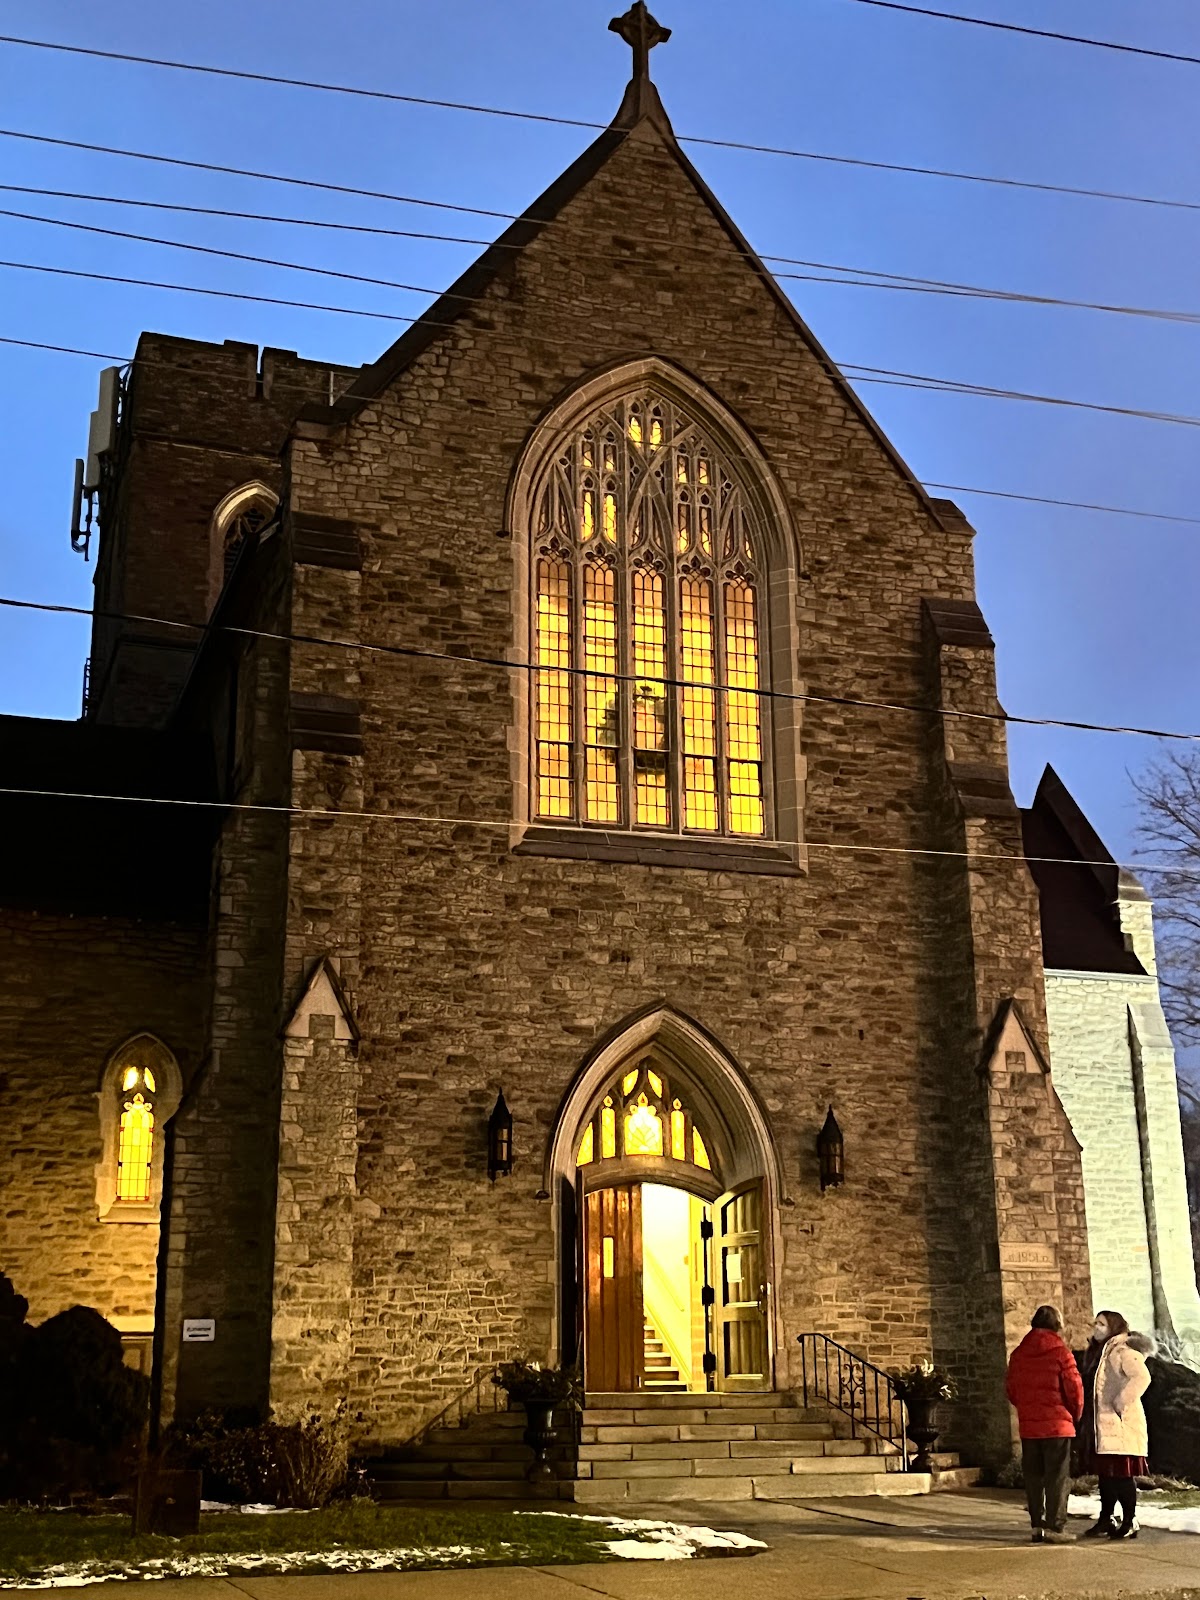 All Saints Kingsway Anglican Church – The Kingsway